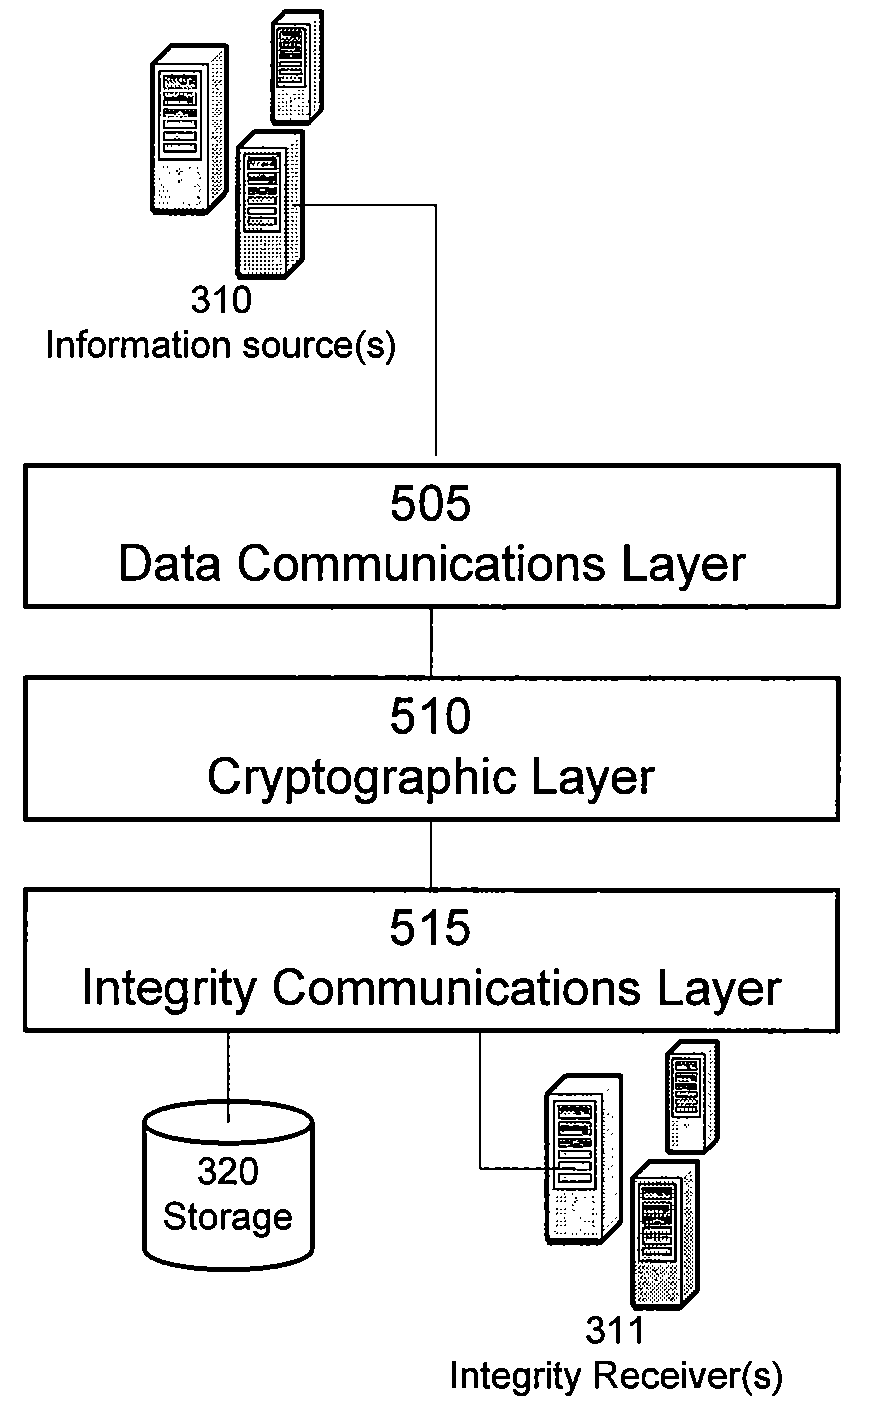 Method and system to provide fine granular integrity to digital data